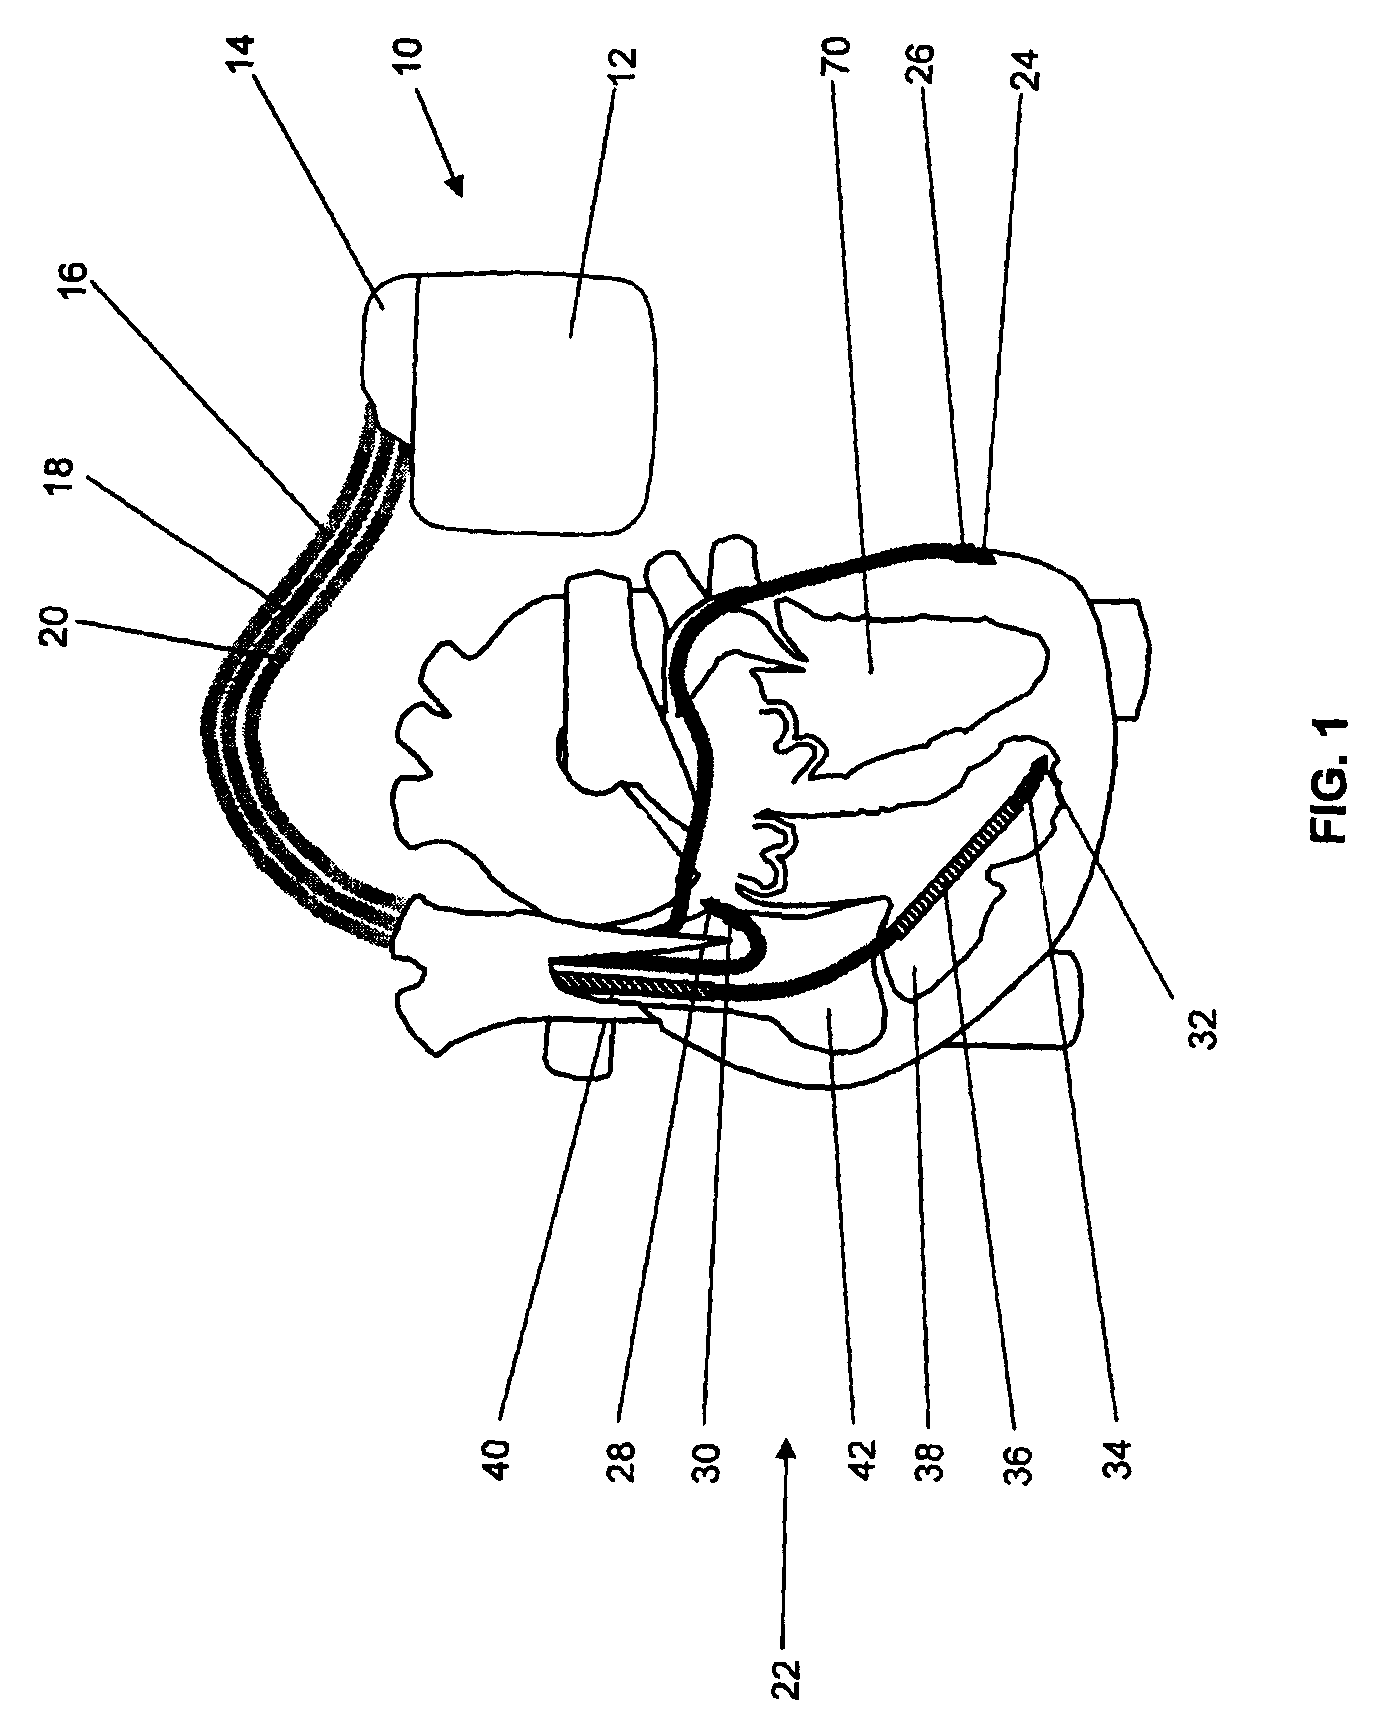 Implantable medical device and method for LV coronary sinus lead implant site optimization